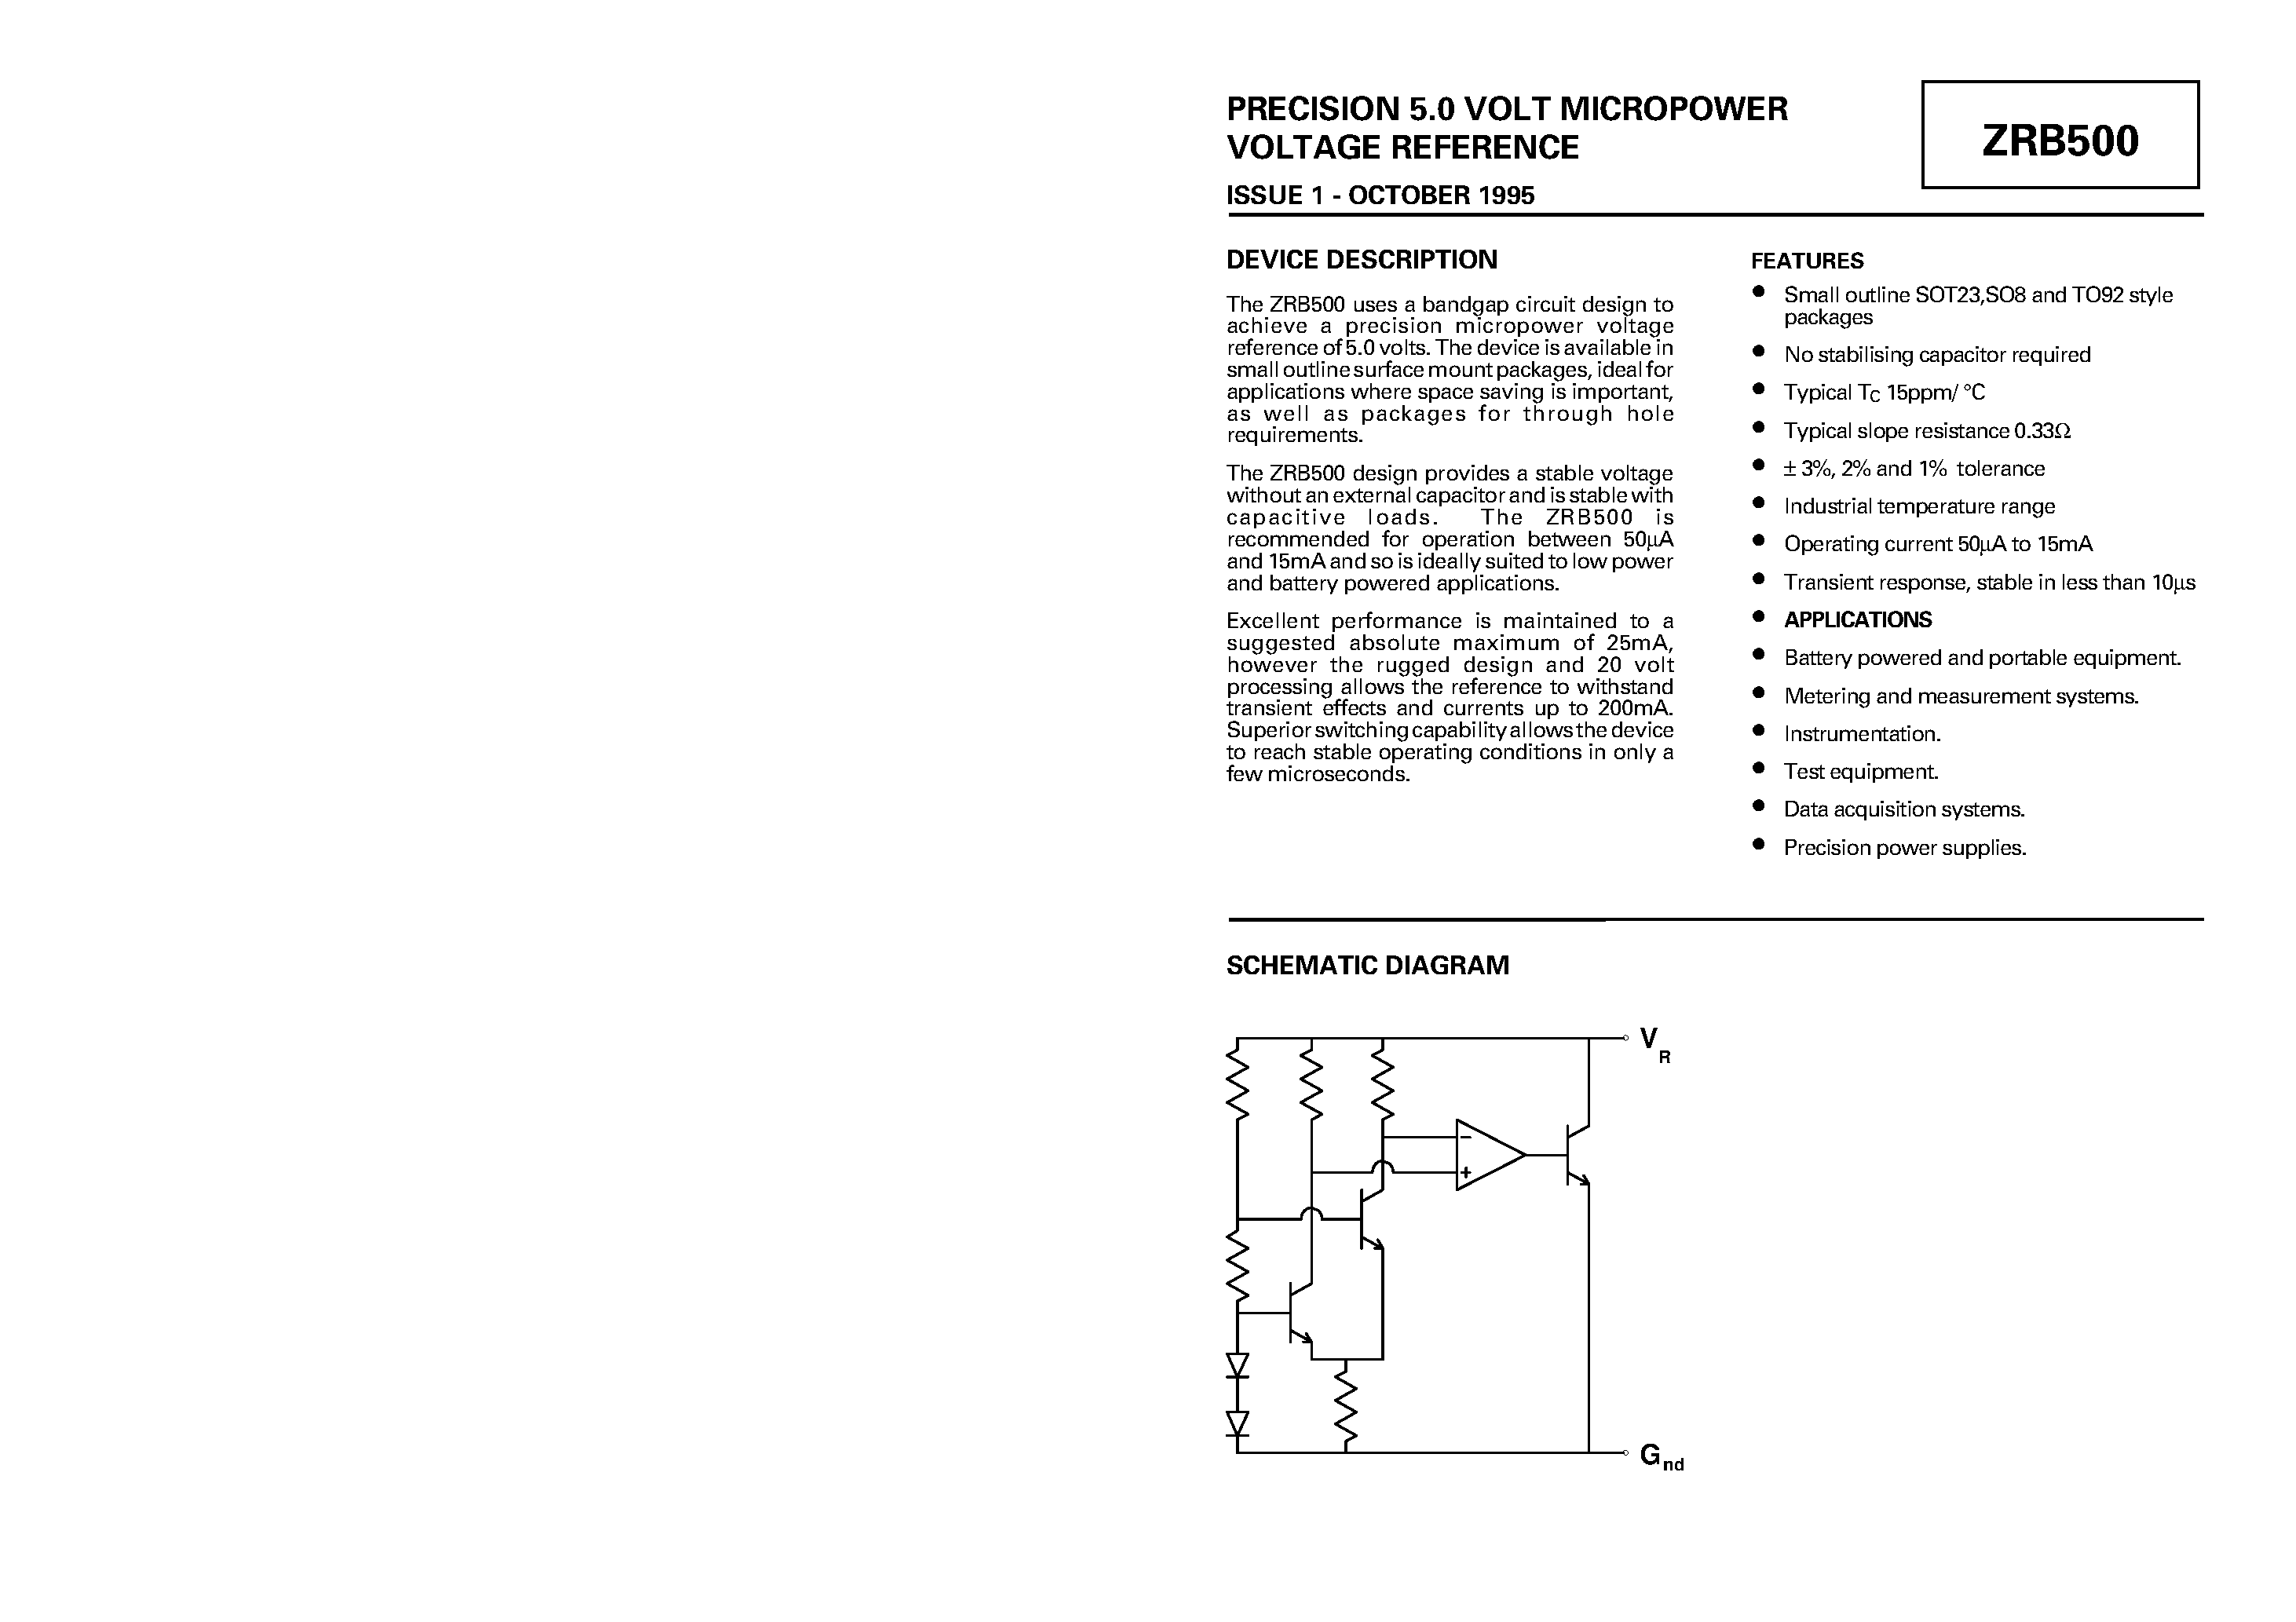 Datasheet ZRB500R02 - PRECISION 5.0 VOLT MICROPOWER VOLTAGE REFERENCE page 1